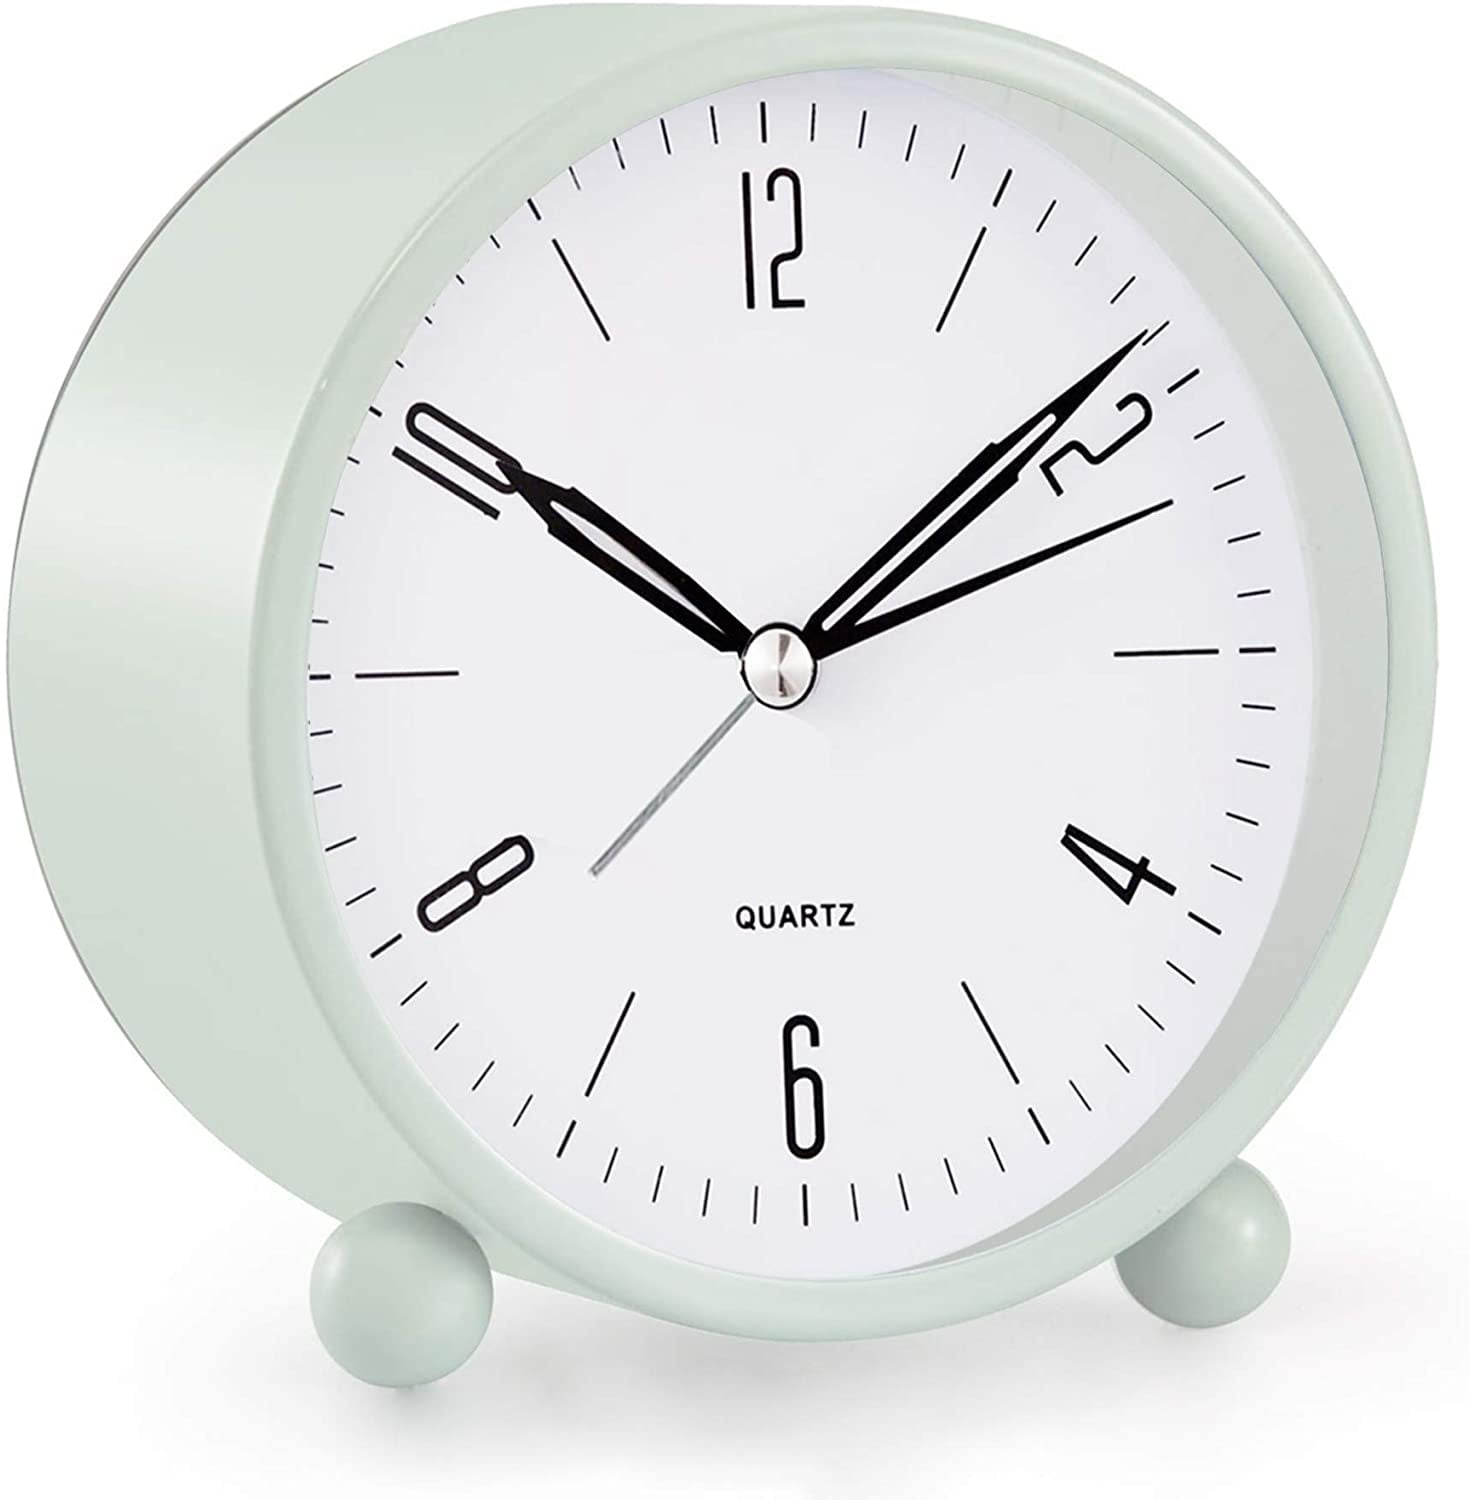 TRAVEL ANALOG DESK ALARM CLOCK 4 COLOR ROUND AA BATTERY OPERATED BEDROOM 